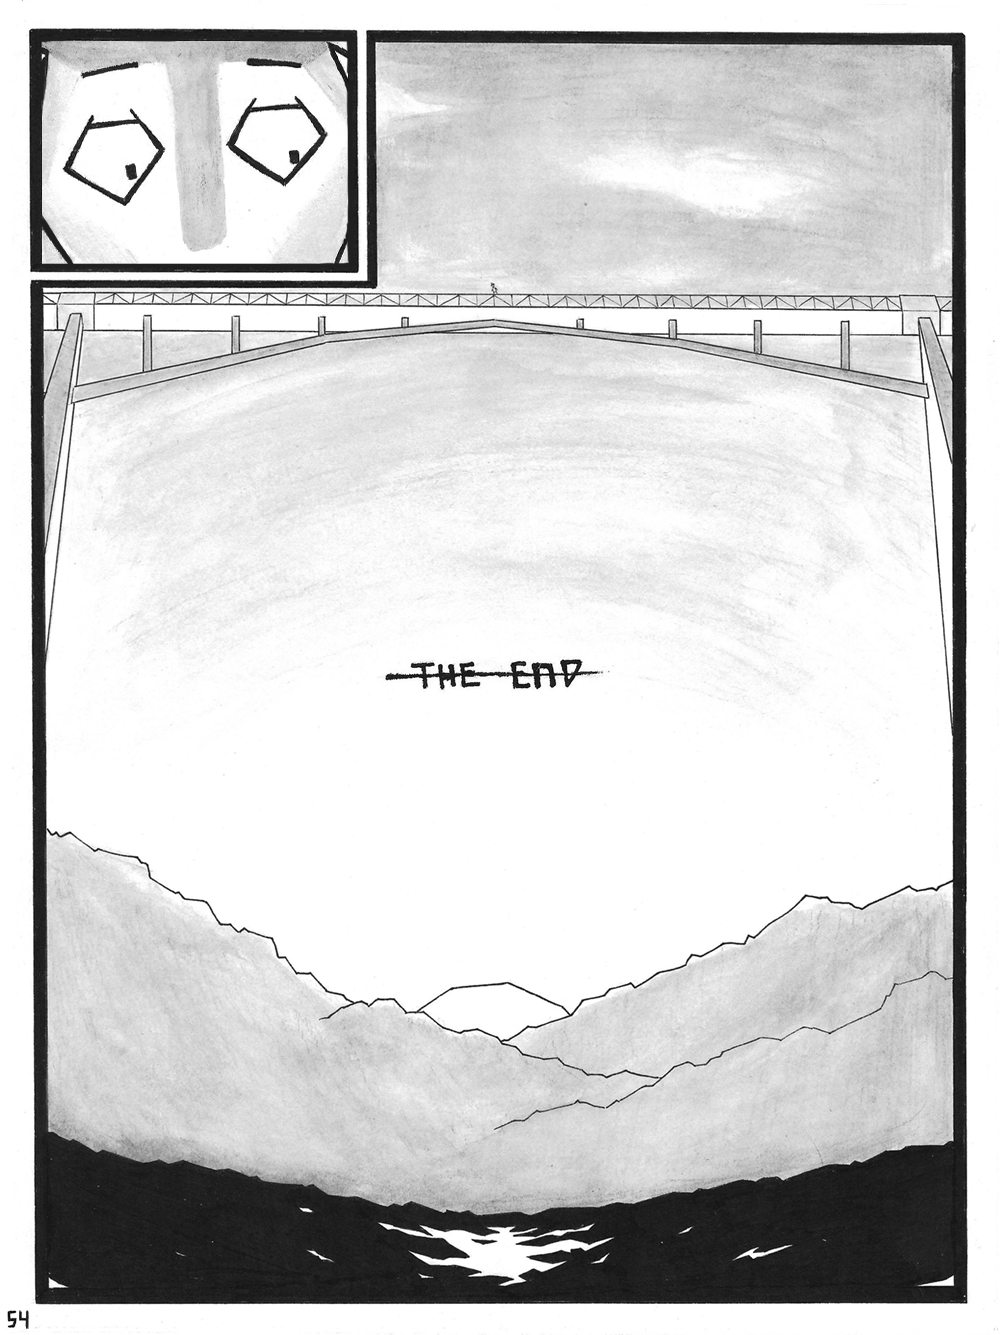 Page 54 [END]